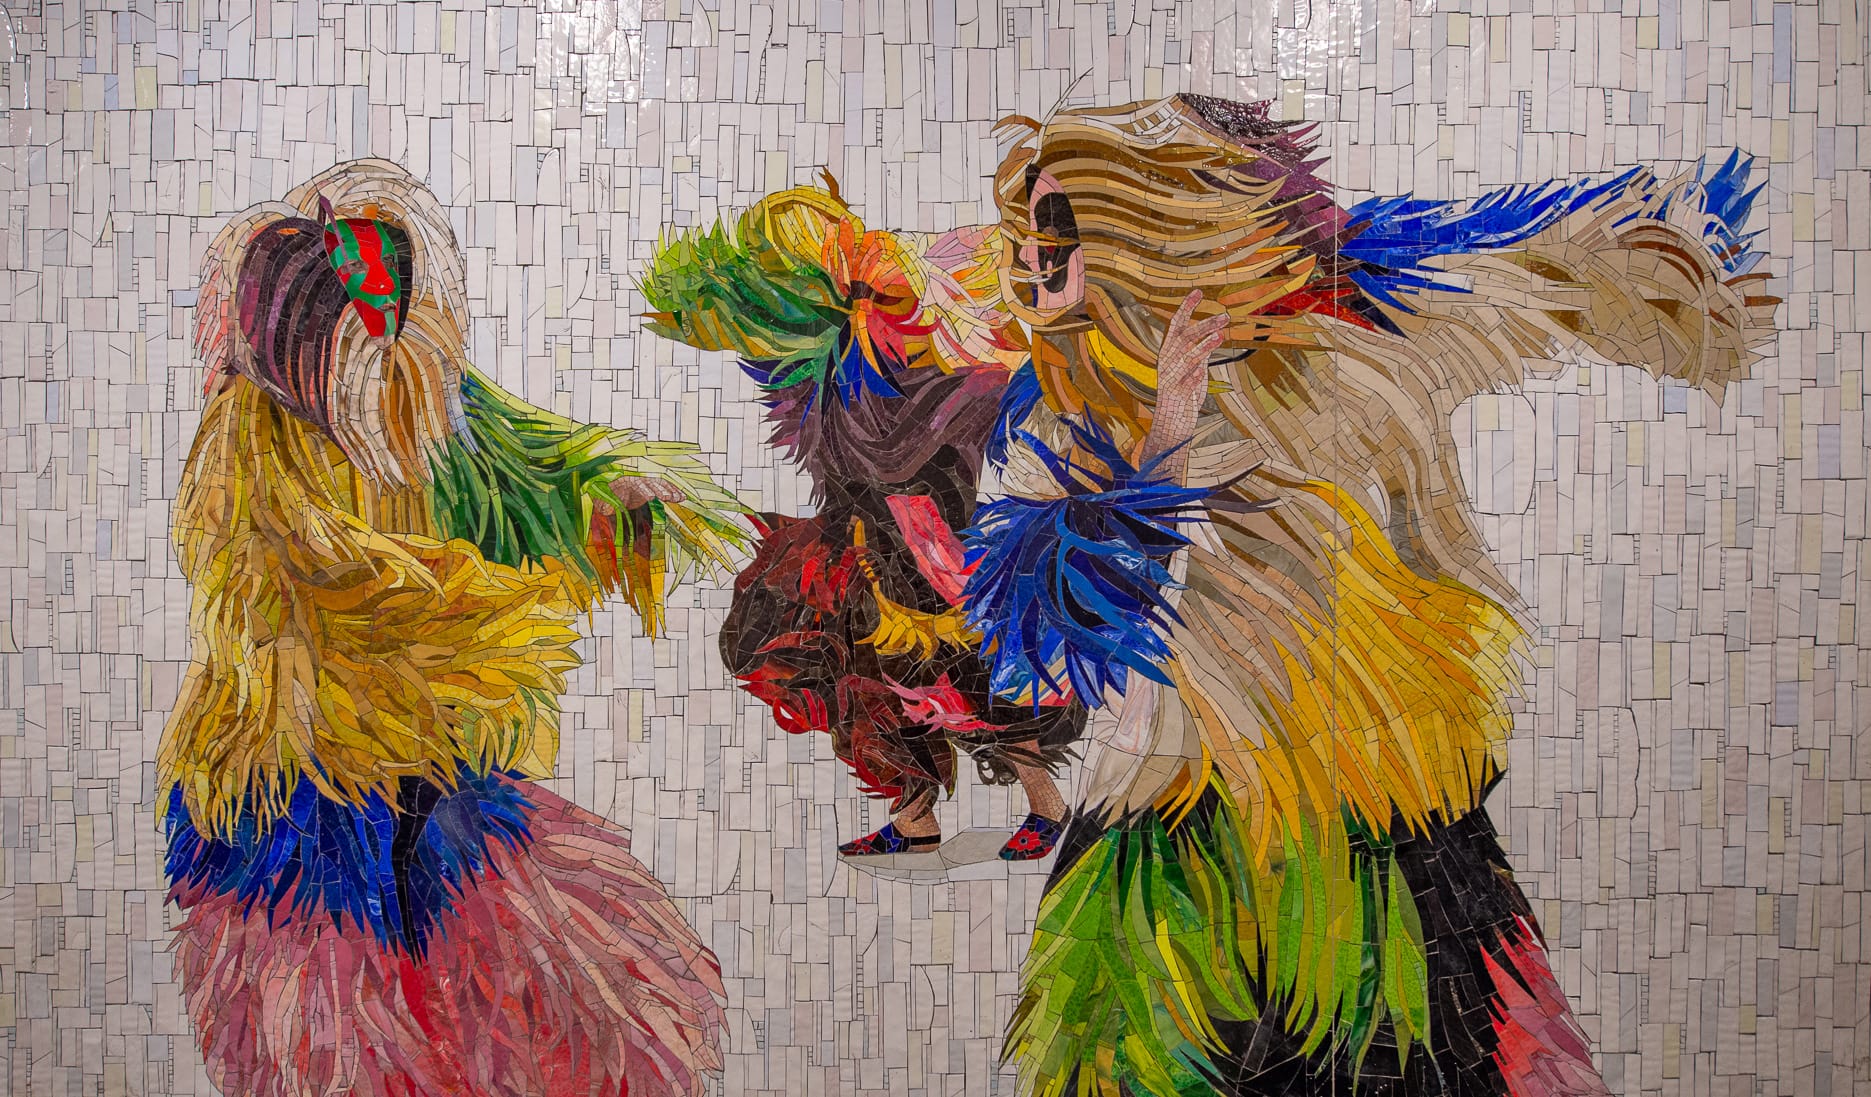 A detail of a mosaic by Nick Cave of figures with colorful, furry suits on, dancing.